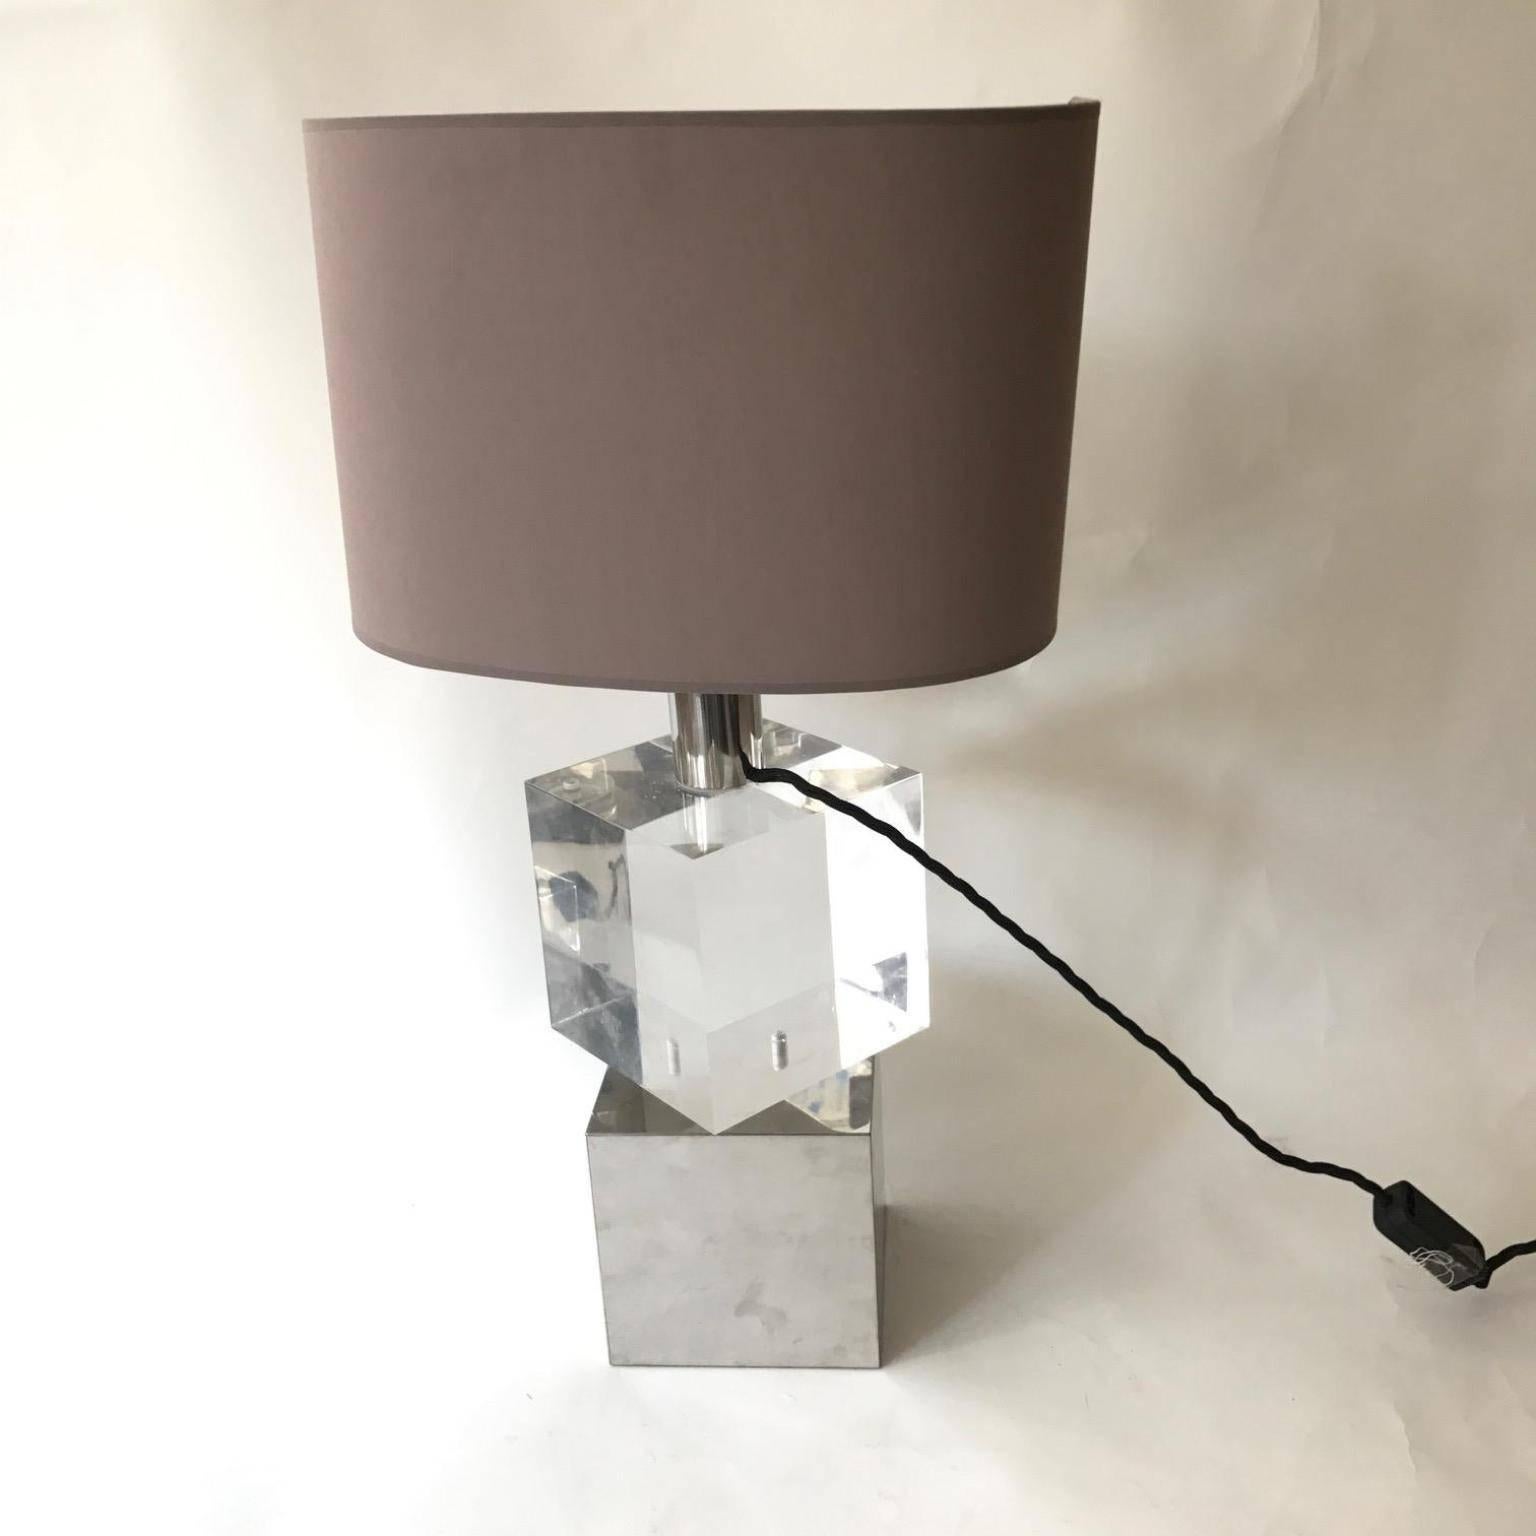 Vintage unusual table lamp with Lucite and chrome cubes with a rod between them that let cubes move around in any position you like, Italian, circa 1970s.